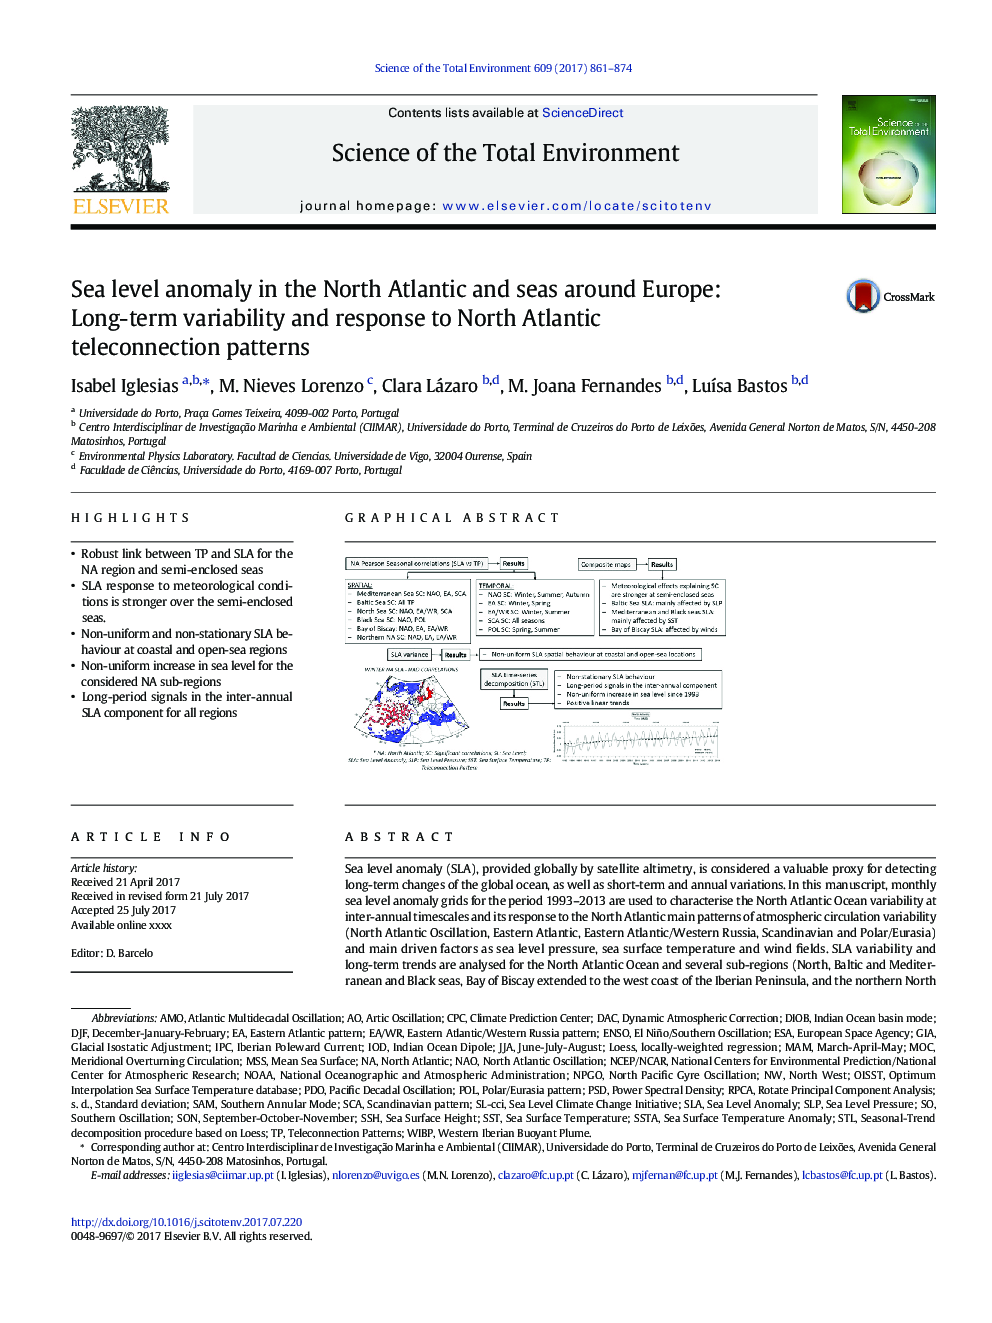 Sea level anomaly in the North Atlantic and seas around Europe: Long-term variability and response to North Atlantic teleconnection patterns